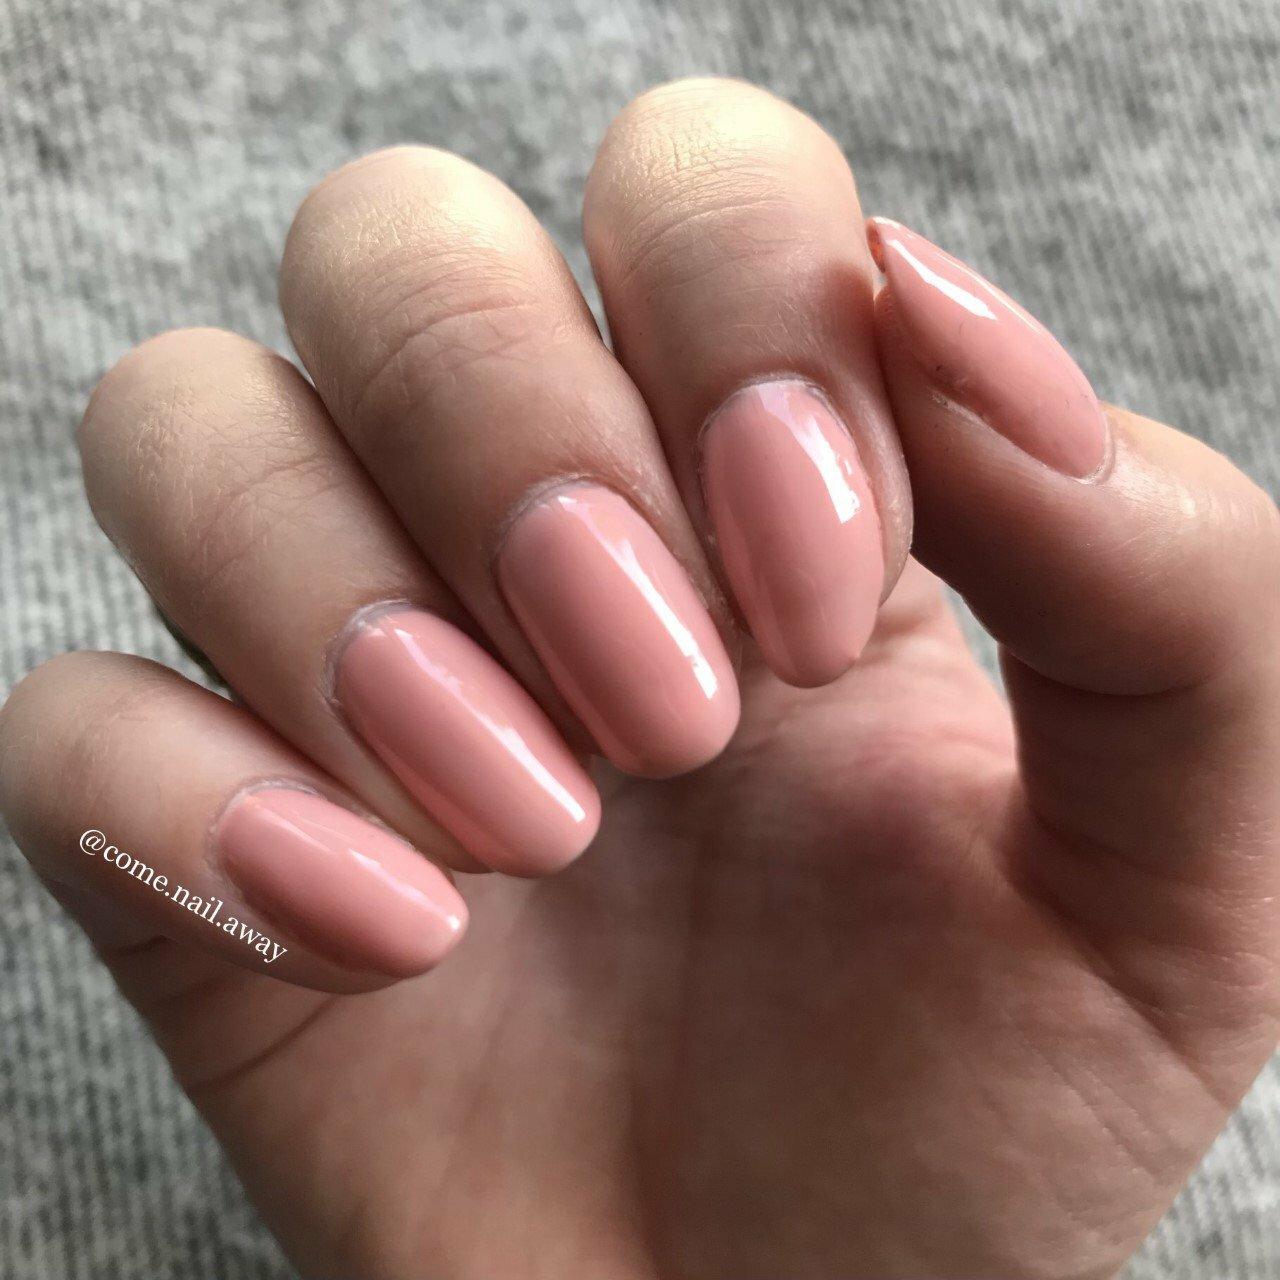 49 Cute Nail Art Design Ideas With Pretty & Creative Details : Blush pink  and rose gold nail design | Gold nail designs, Blush pink nails, Rose gold  nails design